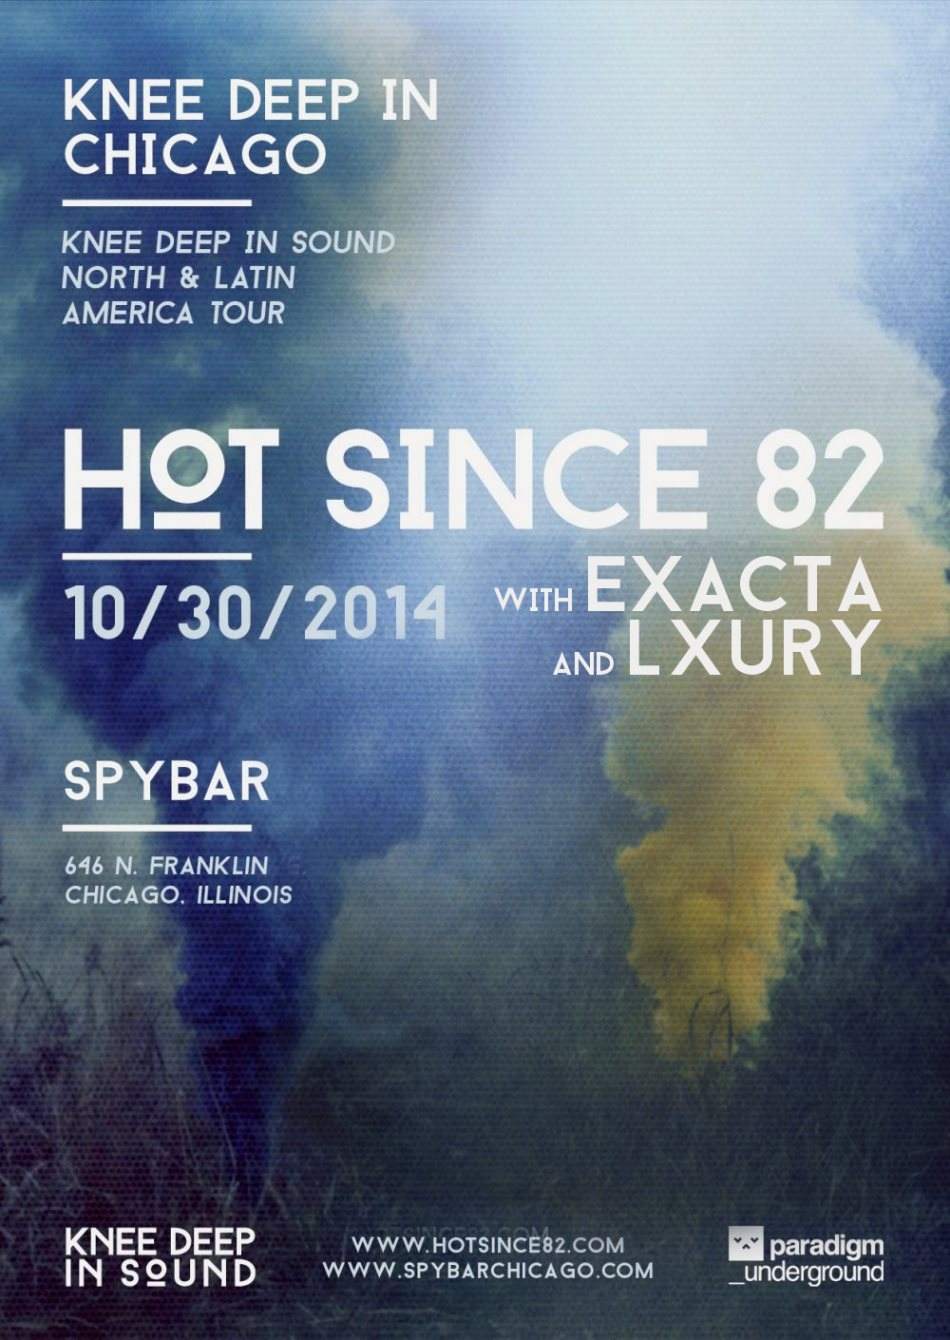 Knee Deep In Chicago: Hot Since 82 - Página frontal